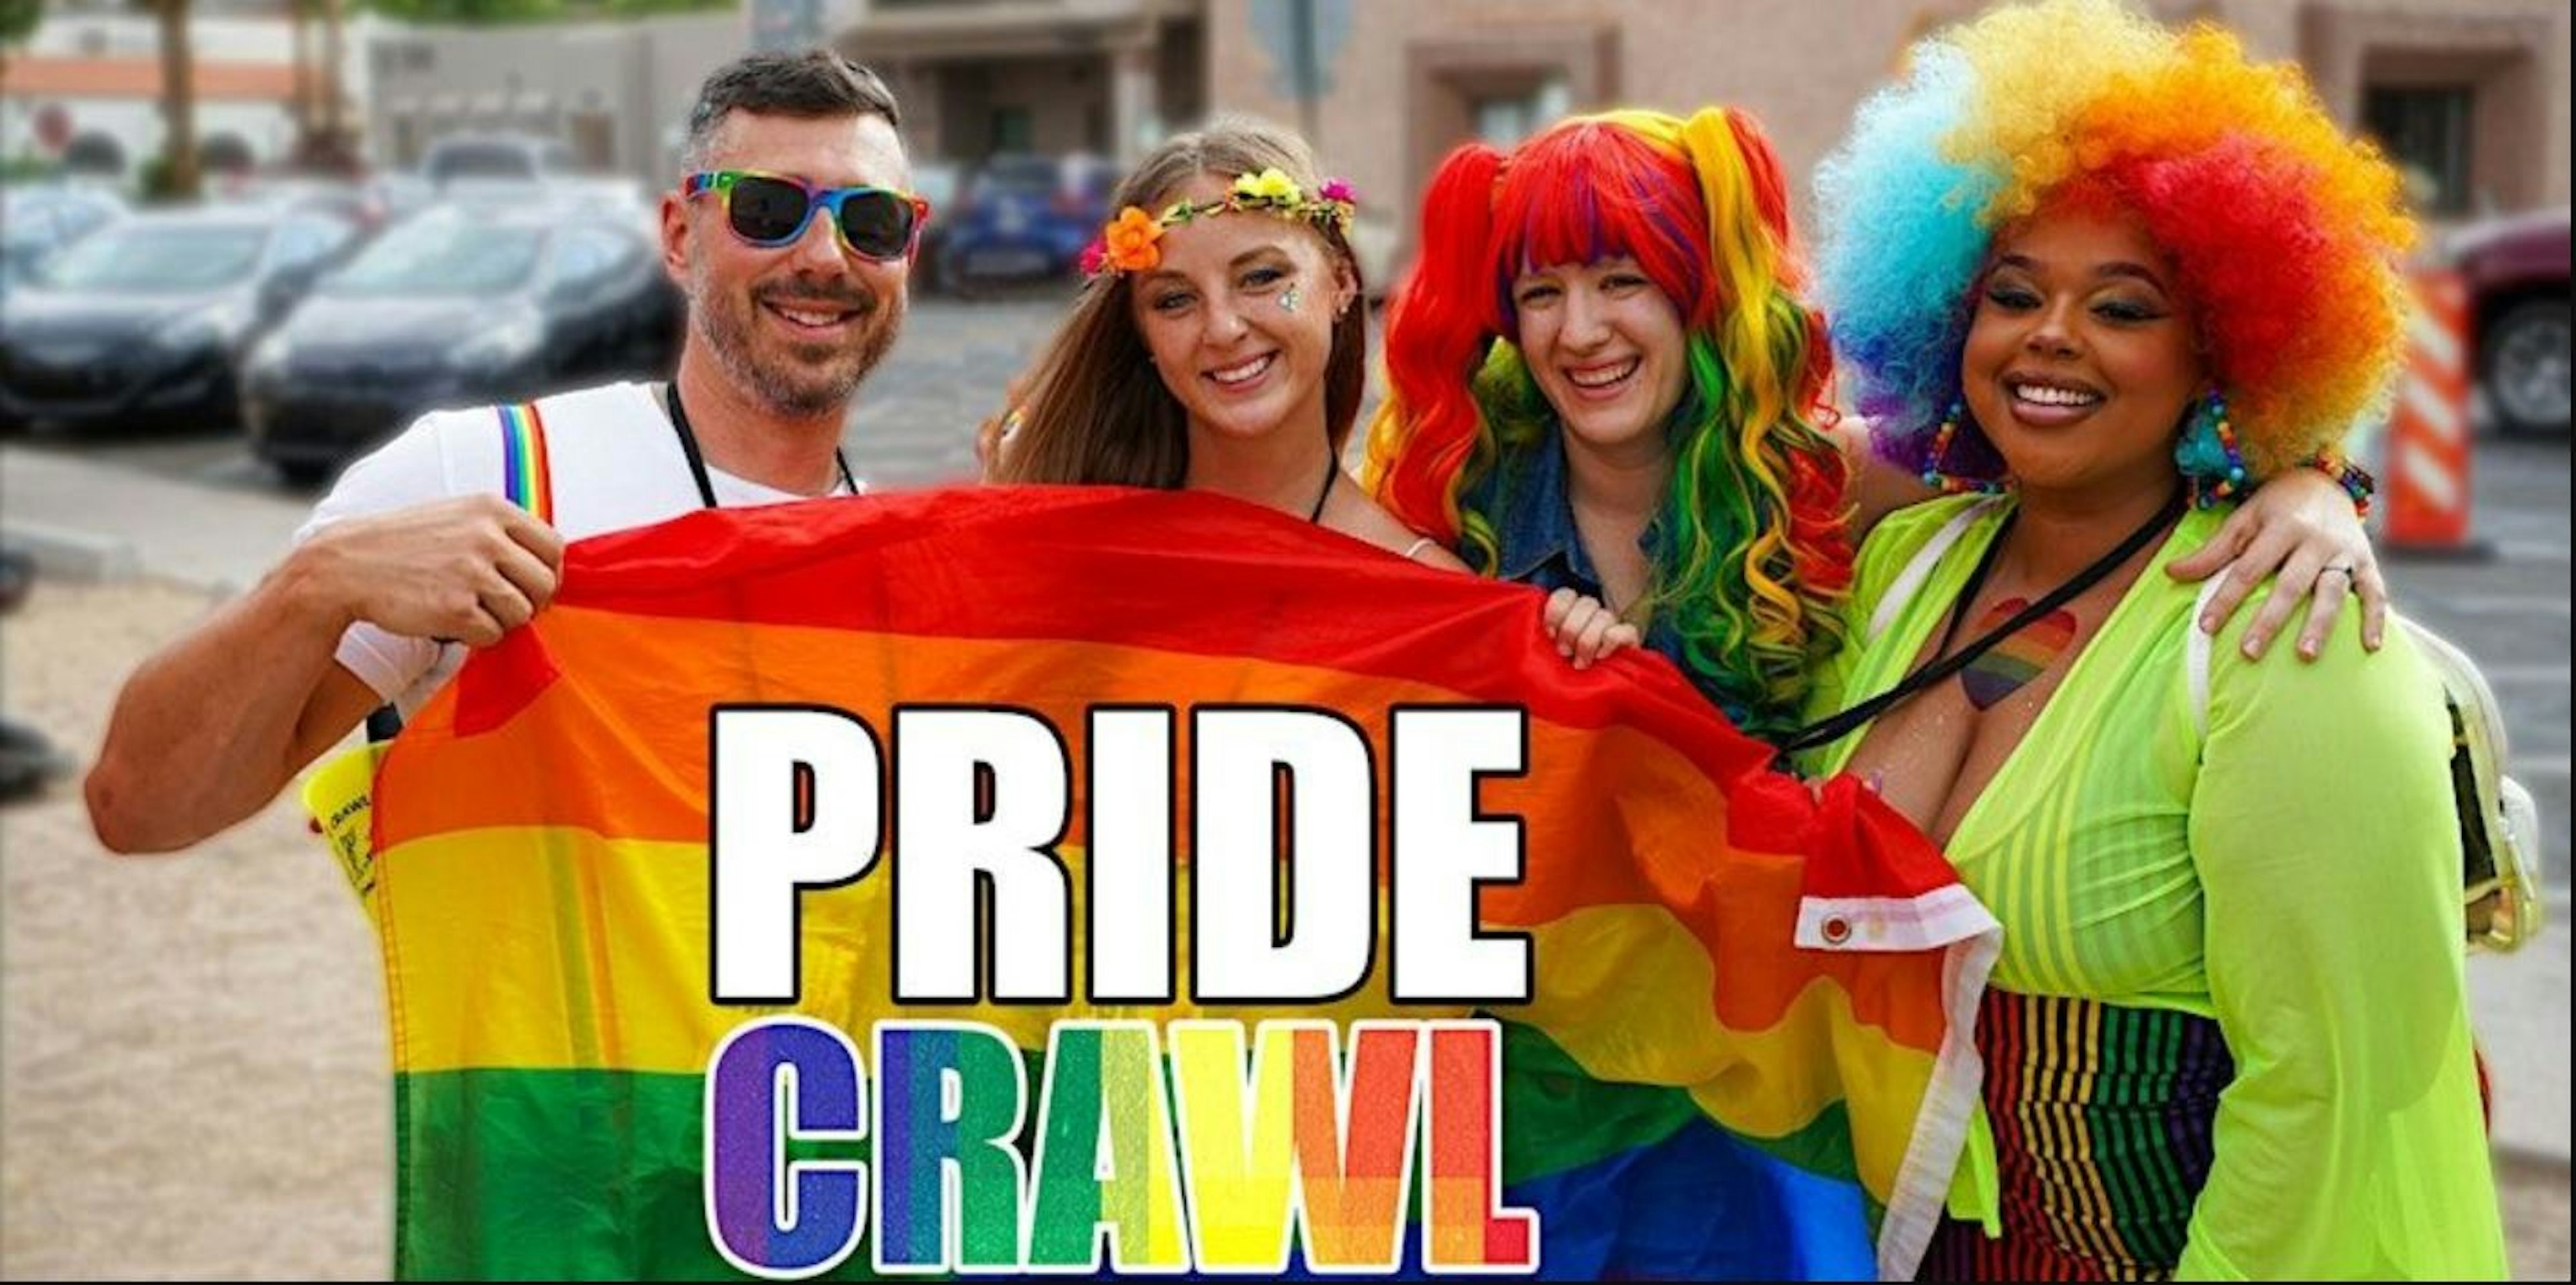 The Official Pride Bar Crawl - Myrtle Beach - 7th Annual